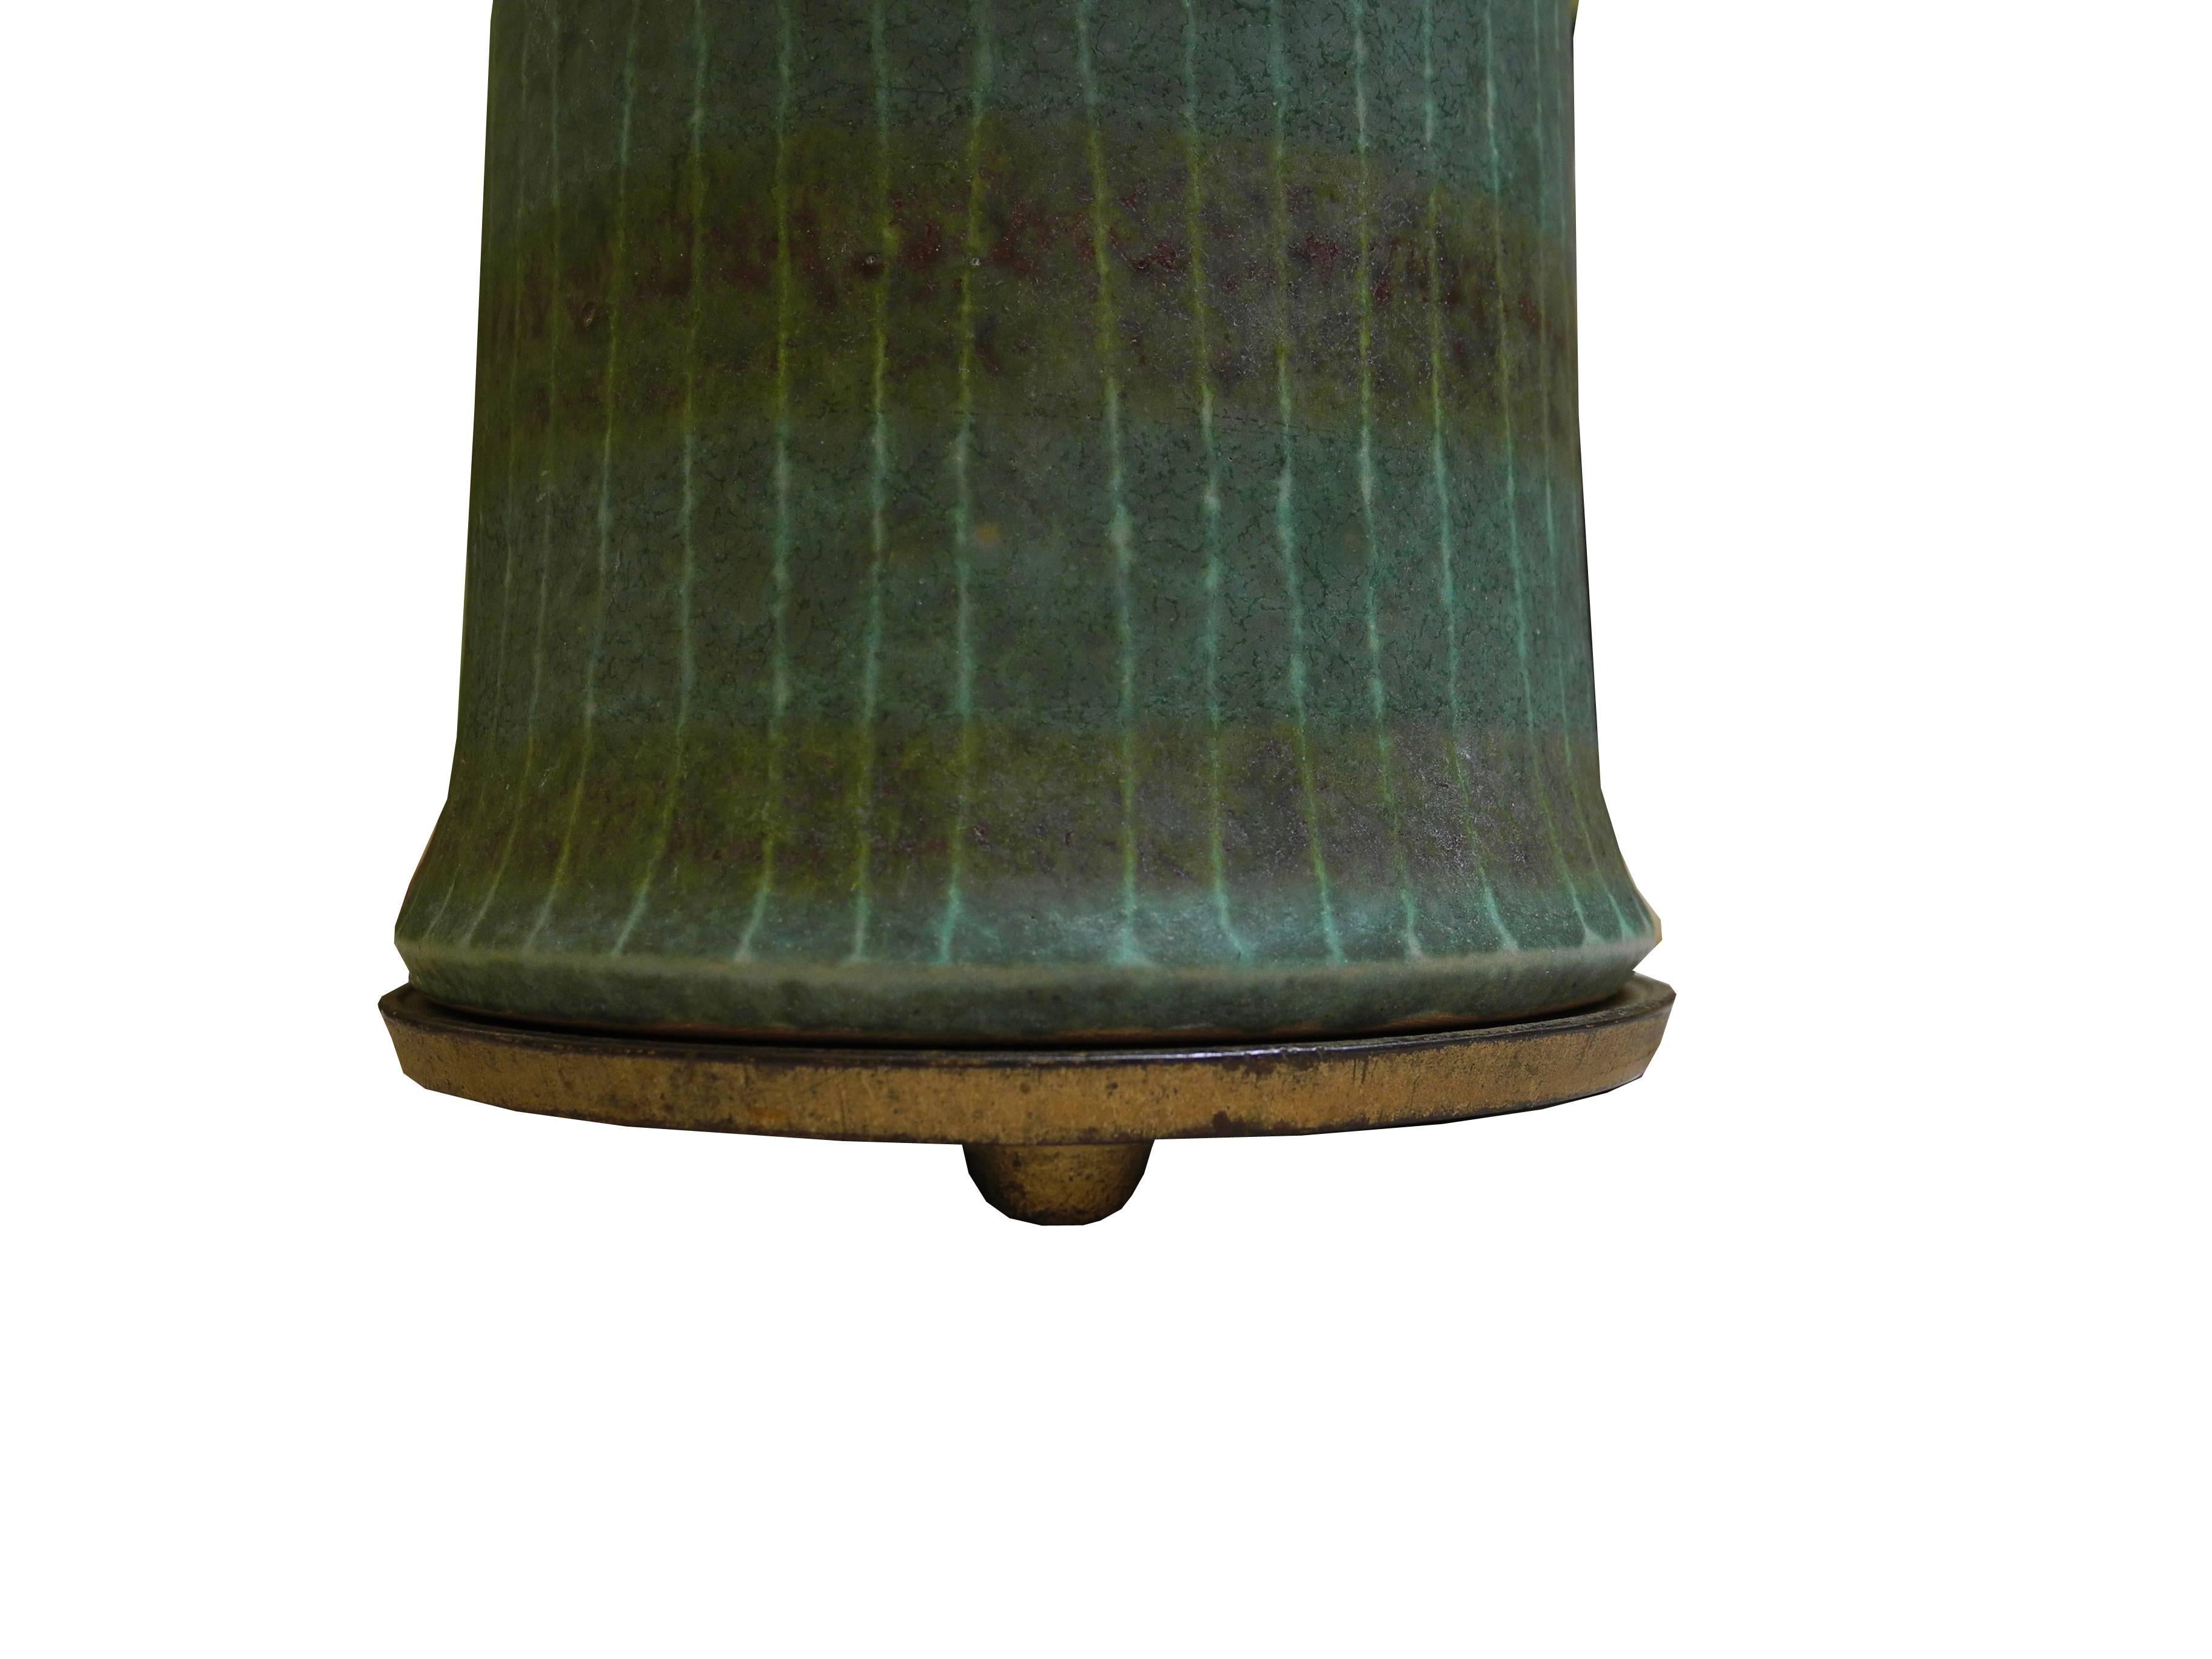 1950s Modern Asian Vessel Style Italian Ceramic Green Table Lamp In Good Condition For Sale In Hudson, NY